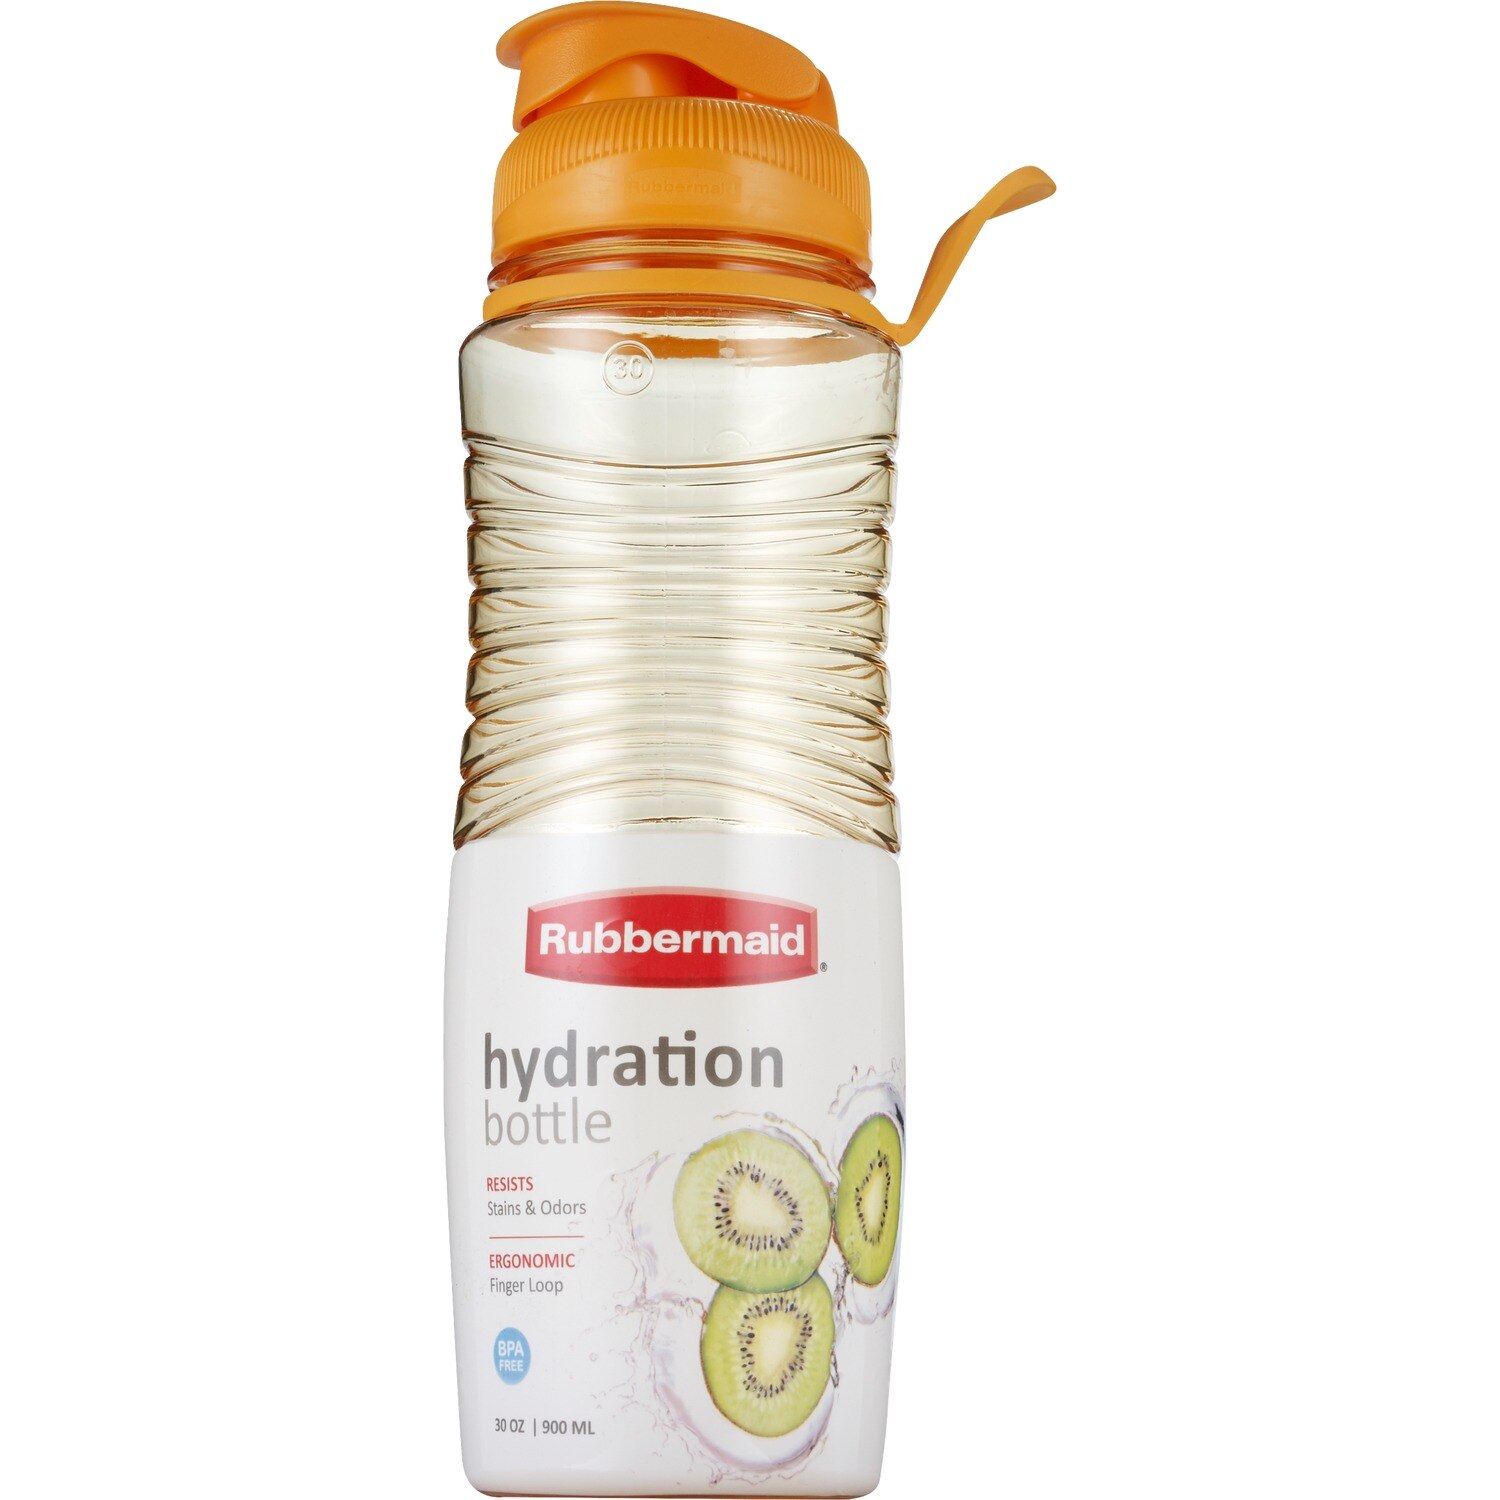 Rubbermaid Hydration Bottle, Resists Stains